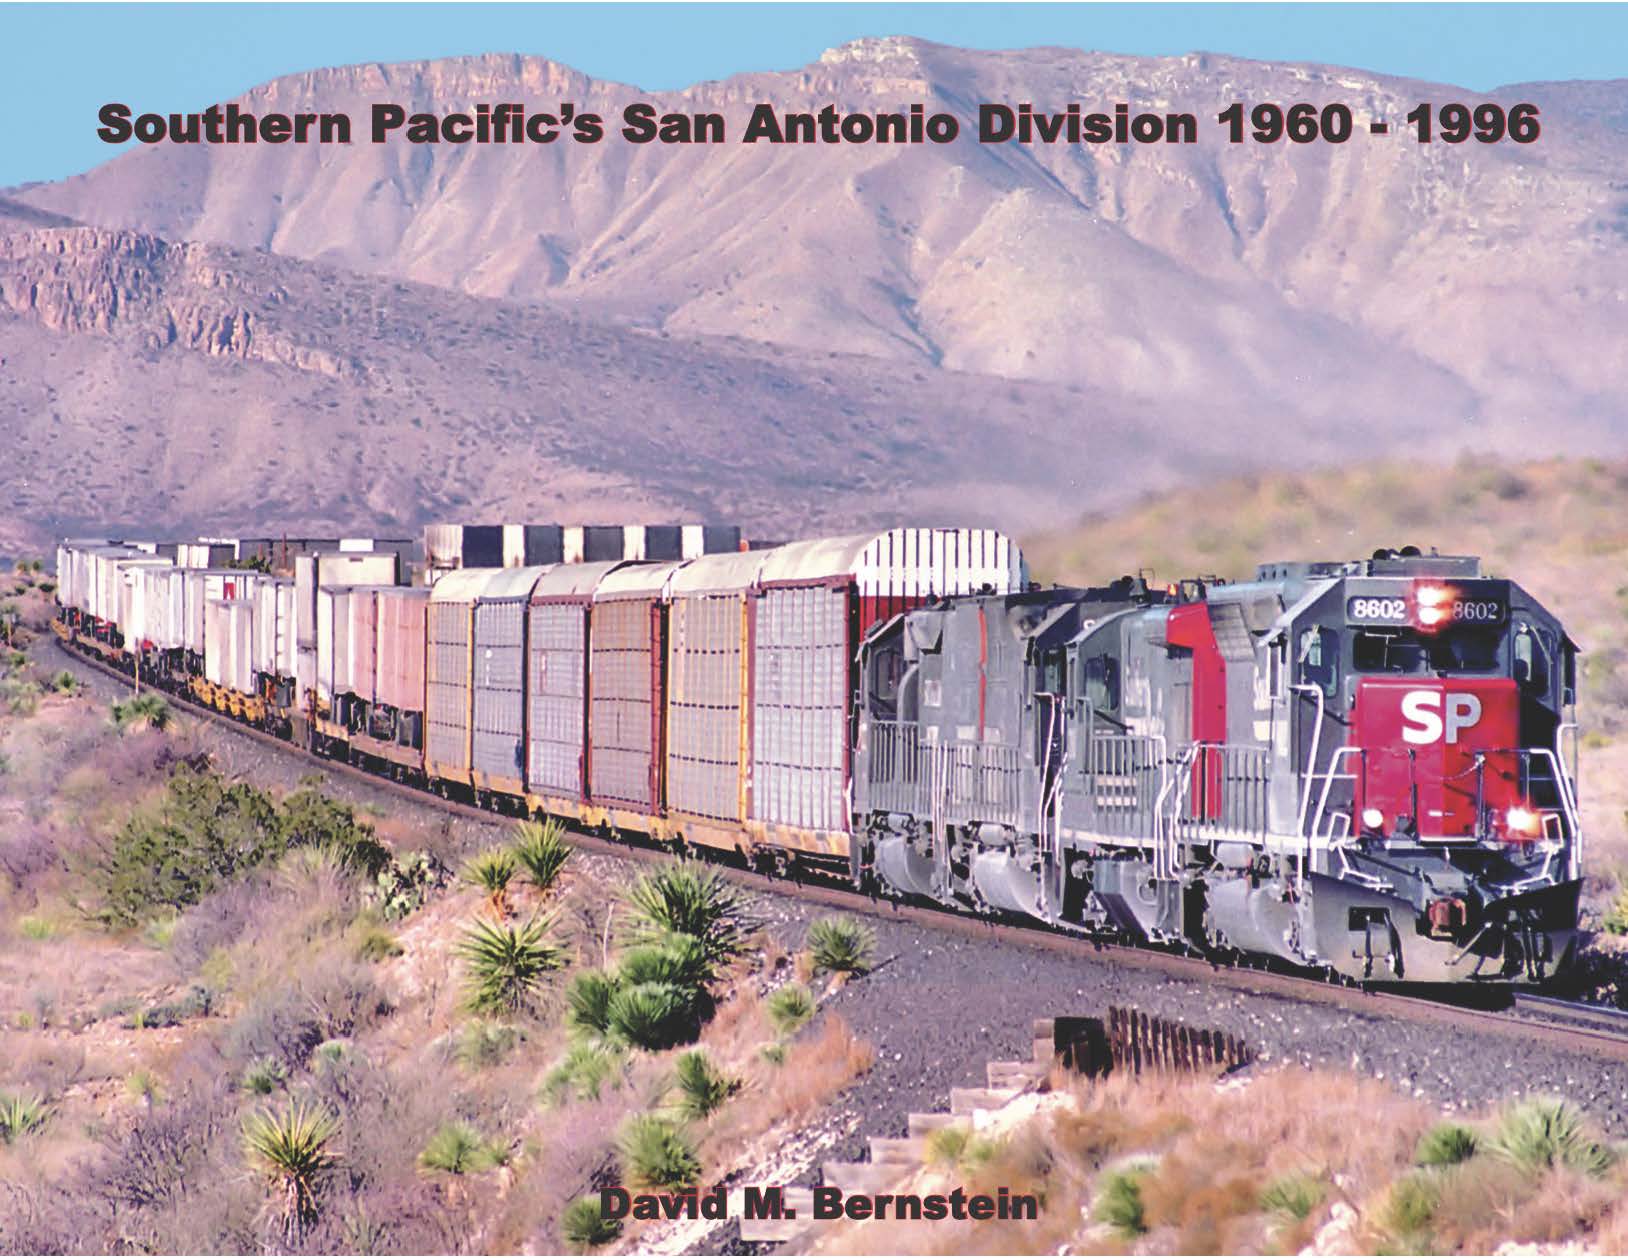 Florida Memory • View showing a Southern Pacific Railroad Company